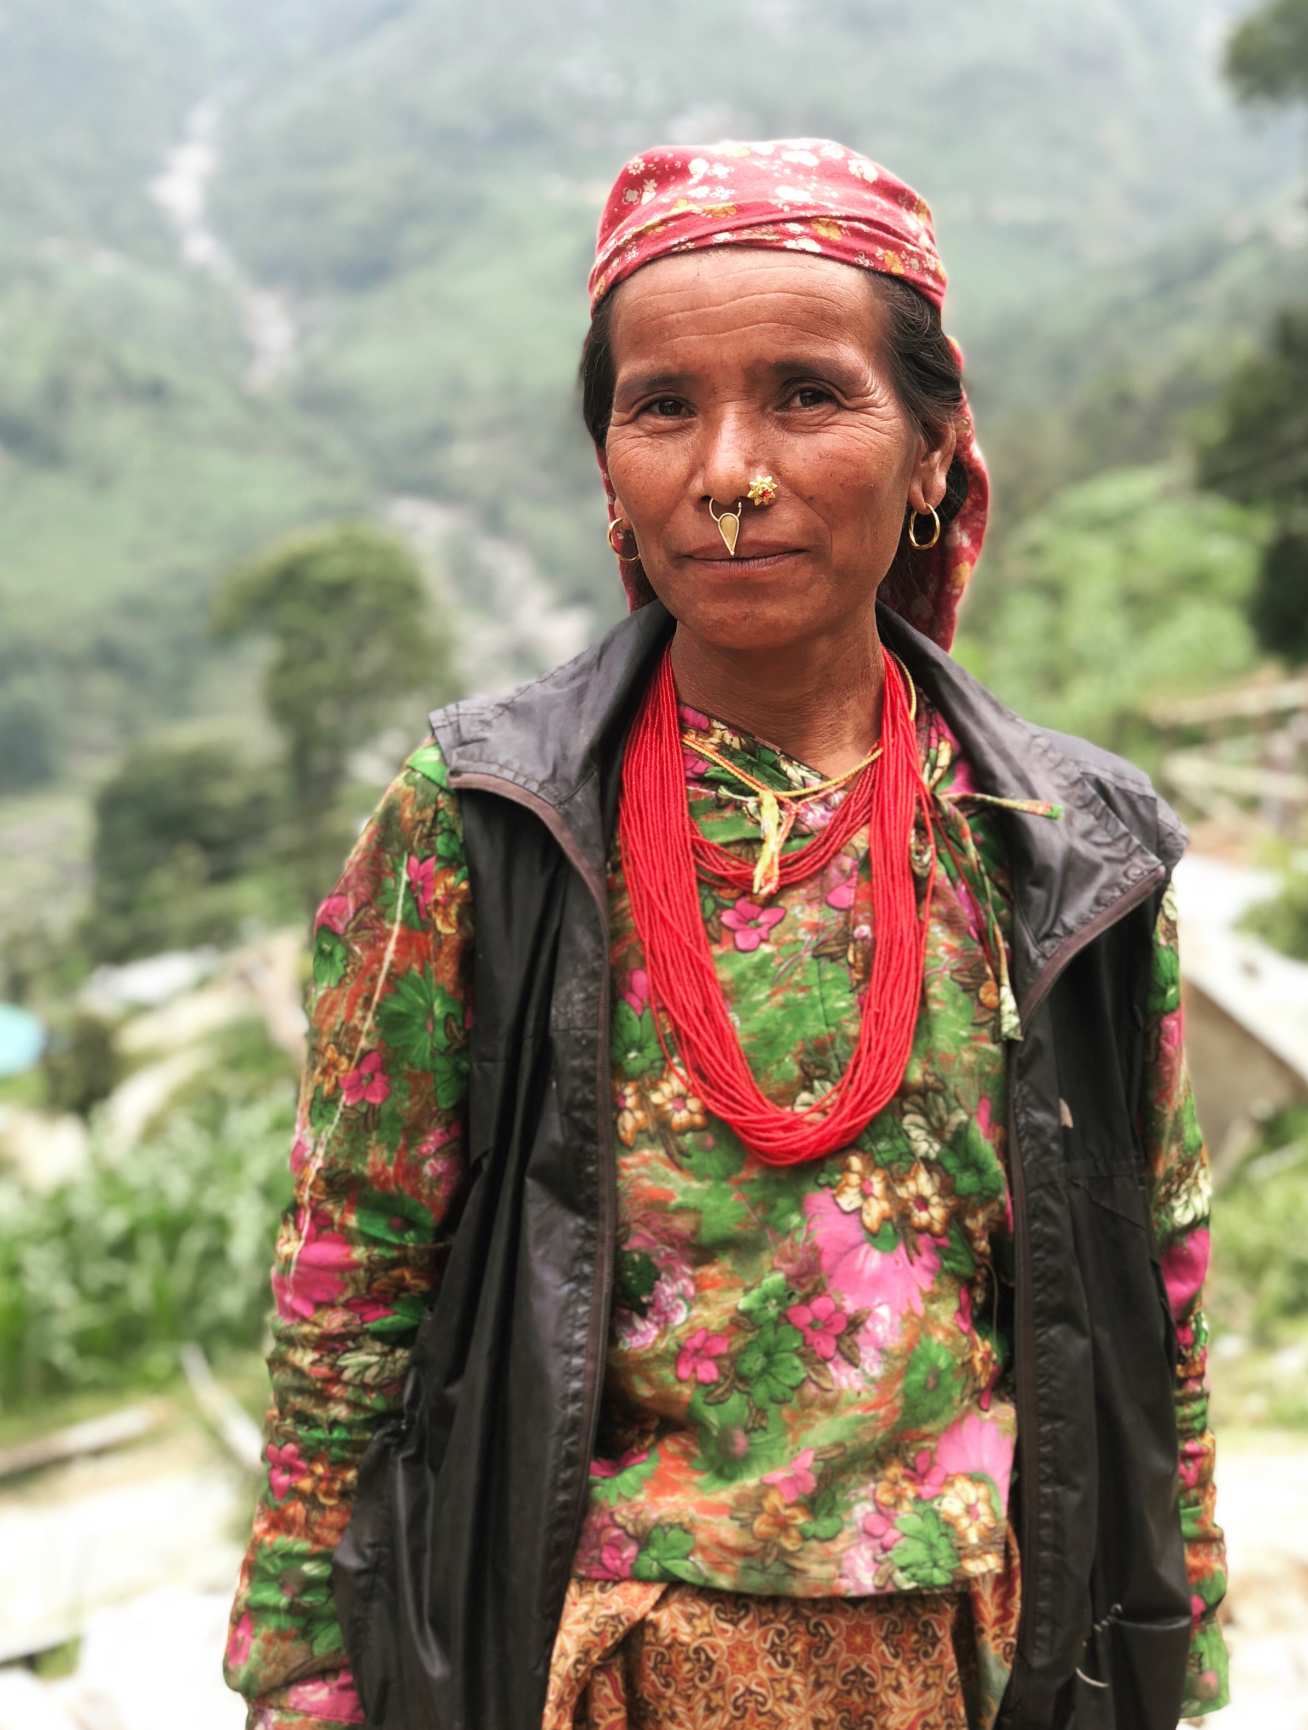 A Nepalese lady in front of landscape